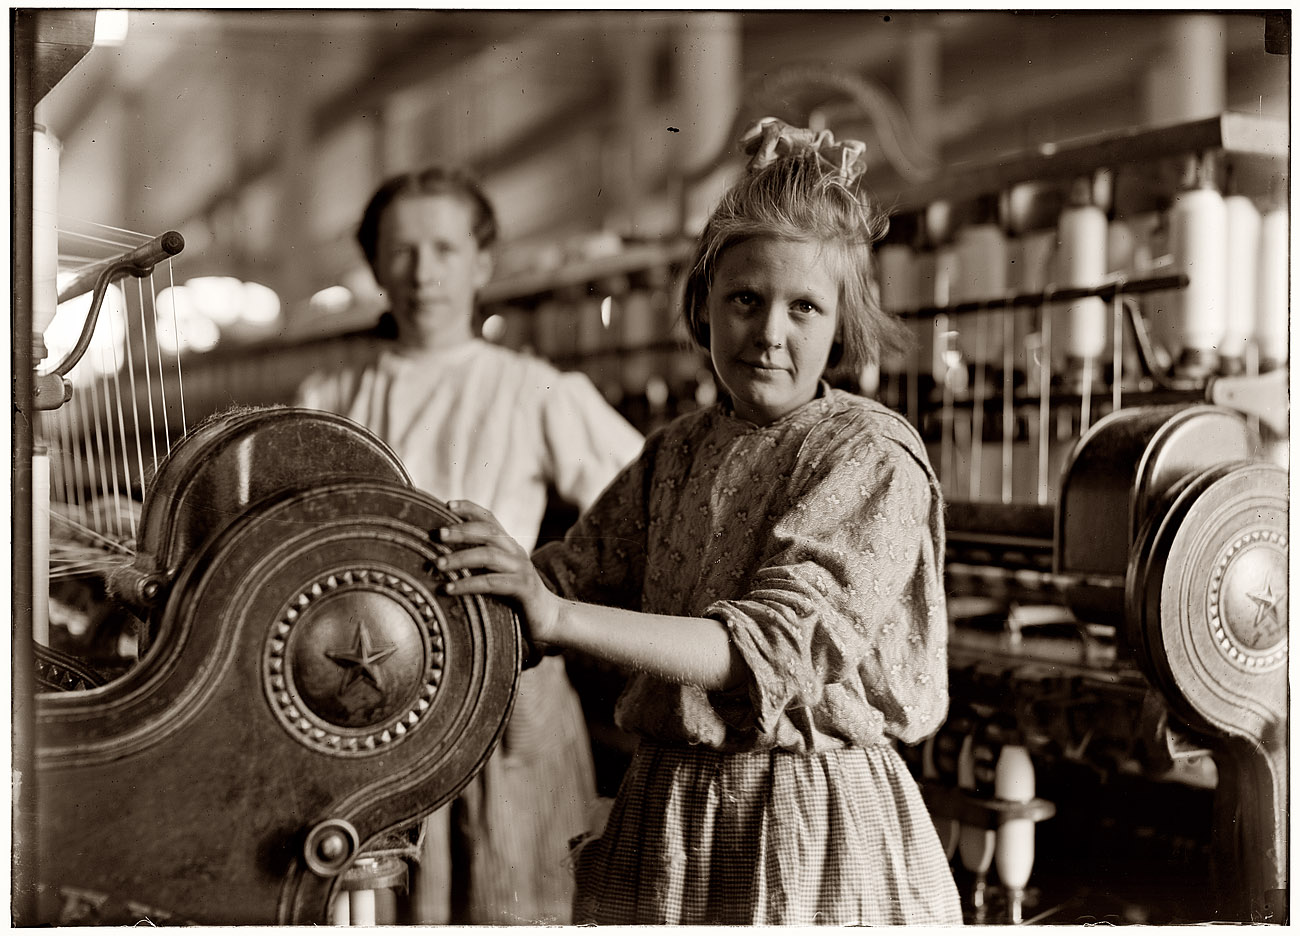 November 1908. "A typical Spinner" at Lancaster Cotton Mills in South Carolina. View full size. Photograph and caption by Lewis Wickes Hine.